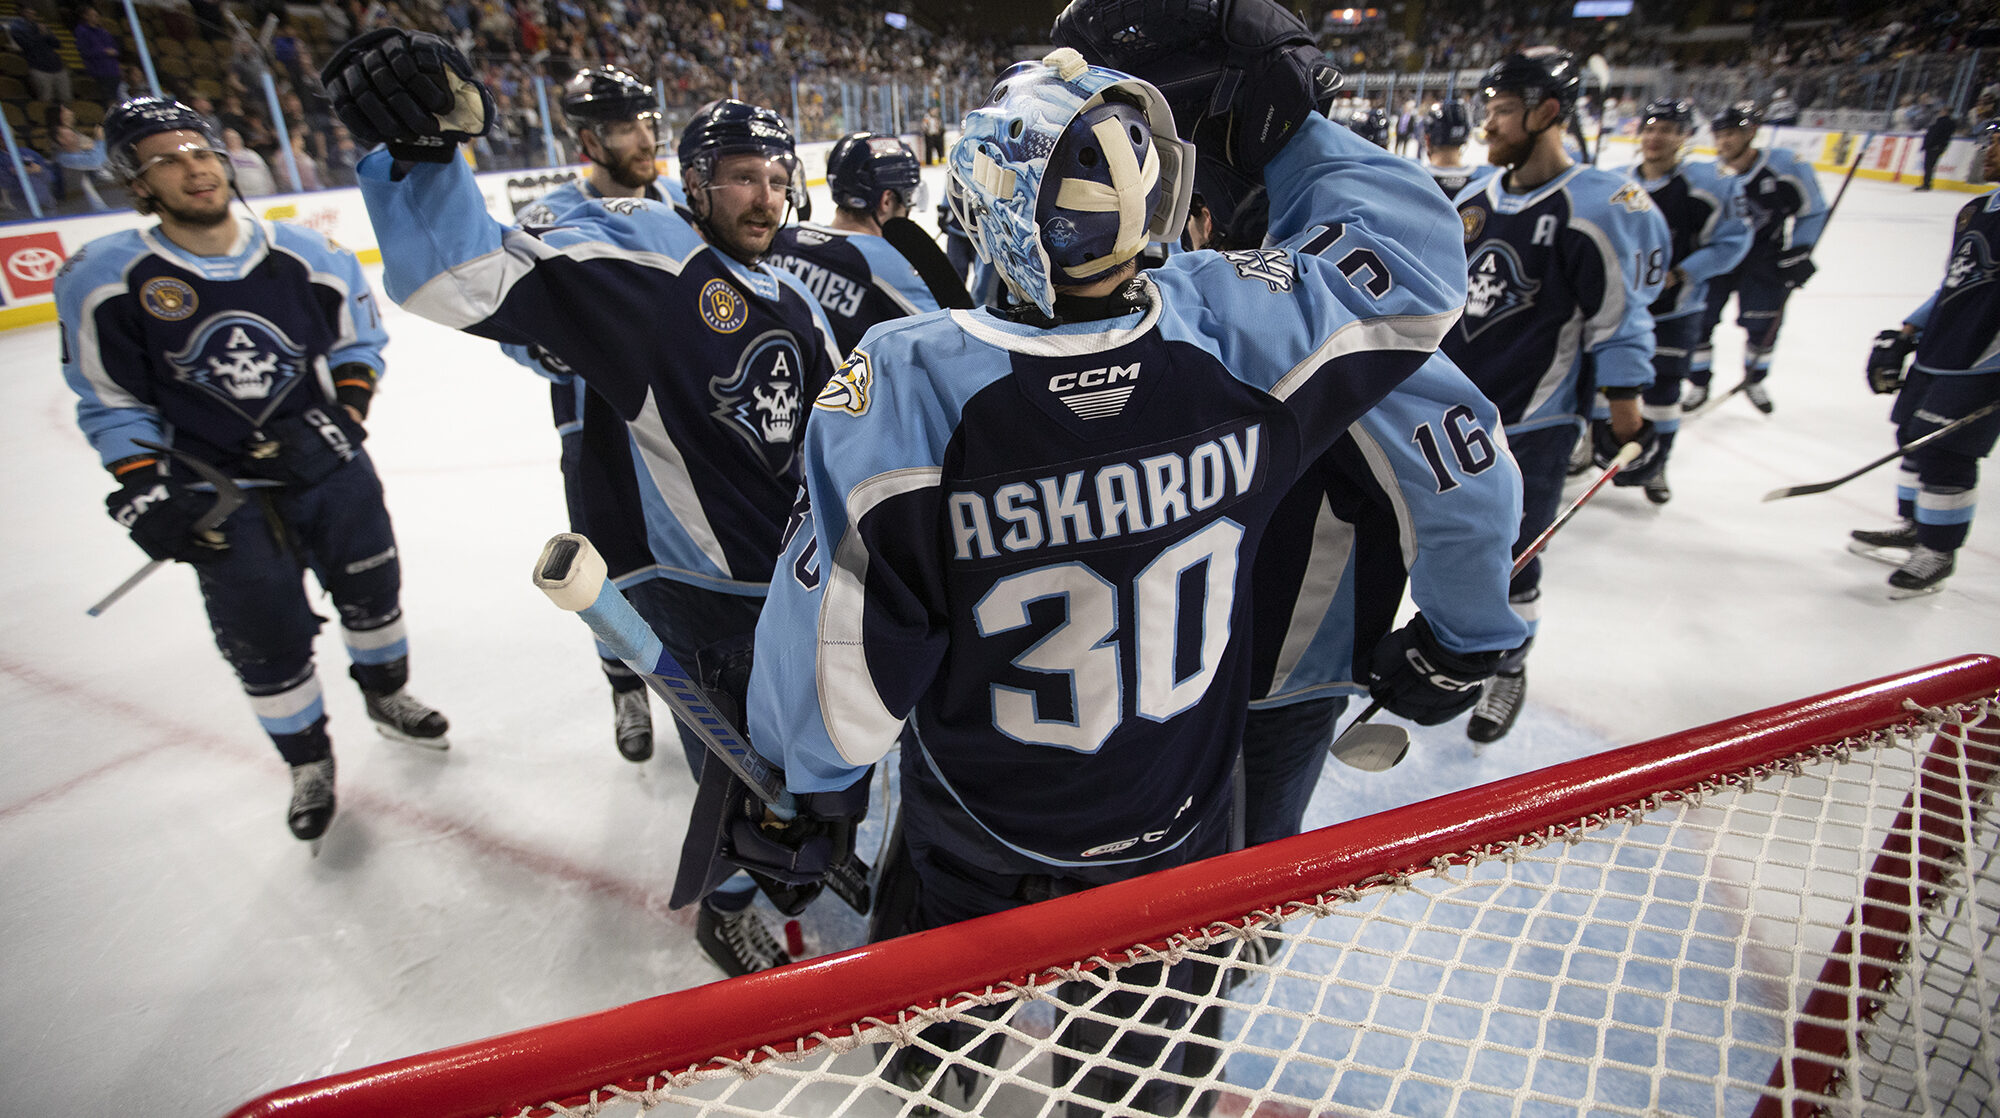 Ads Top Moose to Advance - Milwaukee Admirals